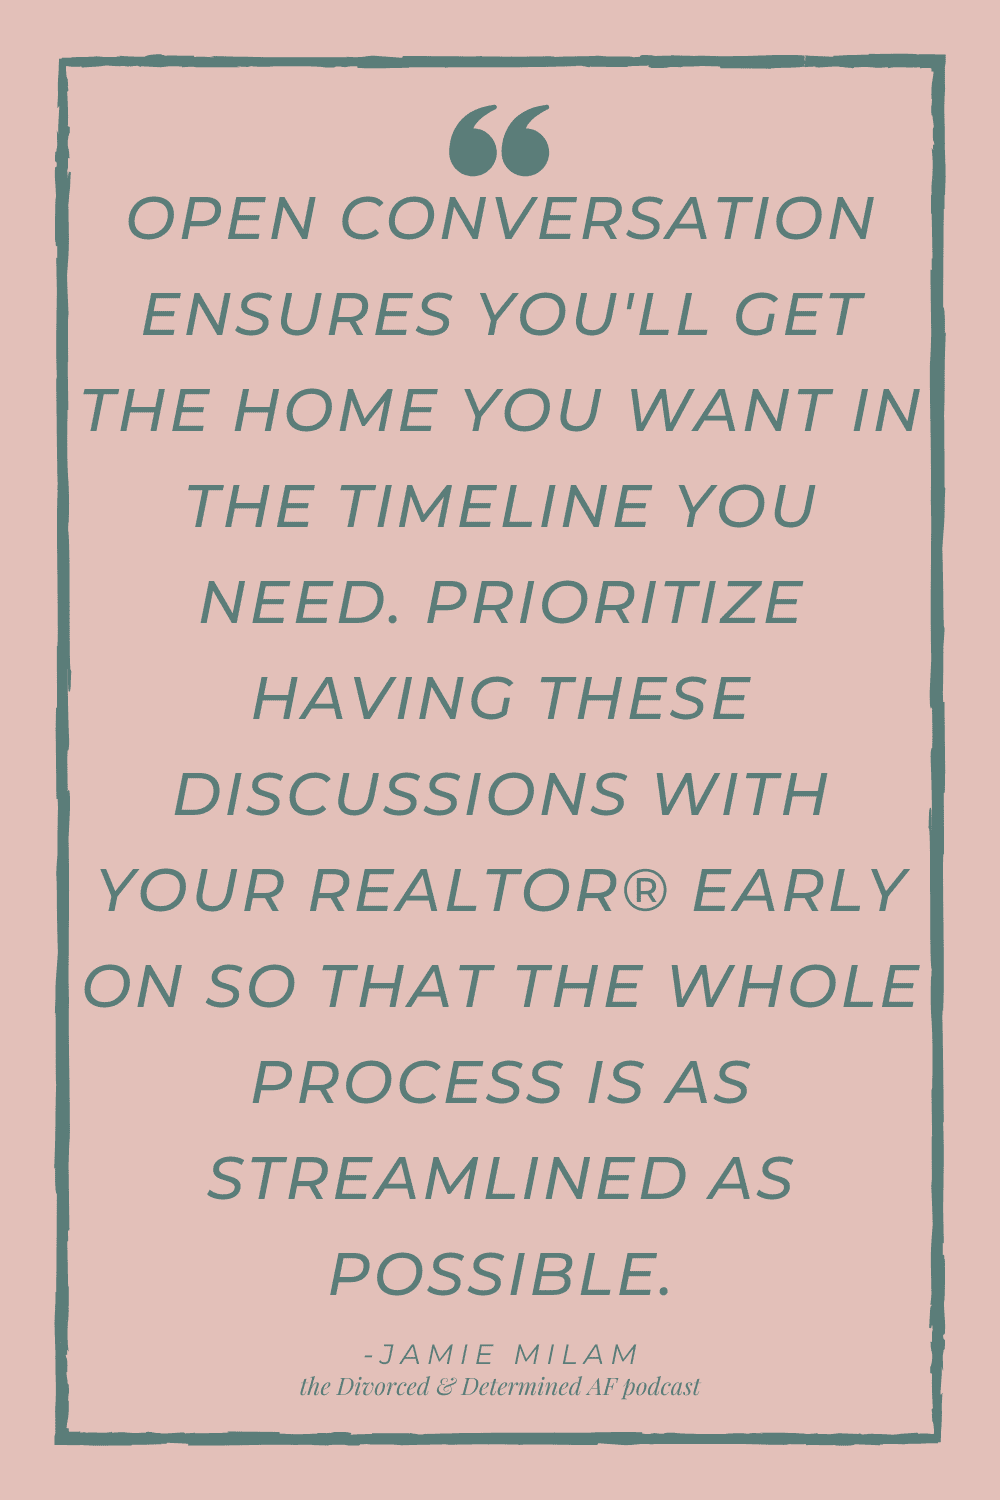 Graphic text: "Open conversation ensures you'll get the home you want in the timeline you need. Prioritize having these discussions with your Realtor® early on so that the whole process is as streamlined as possible."